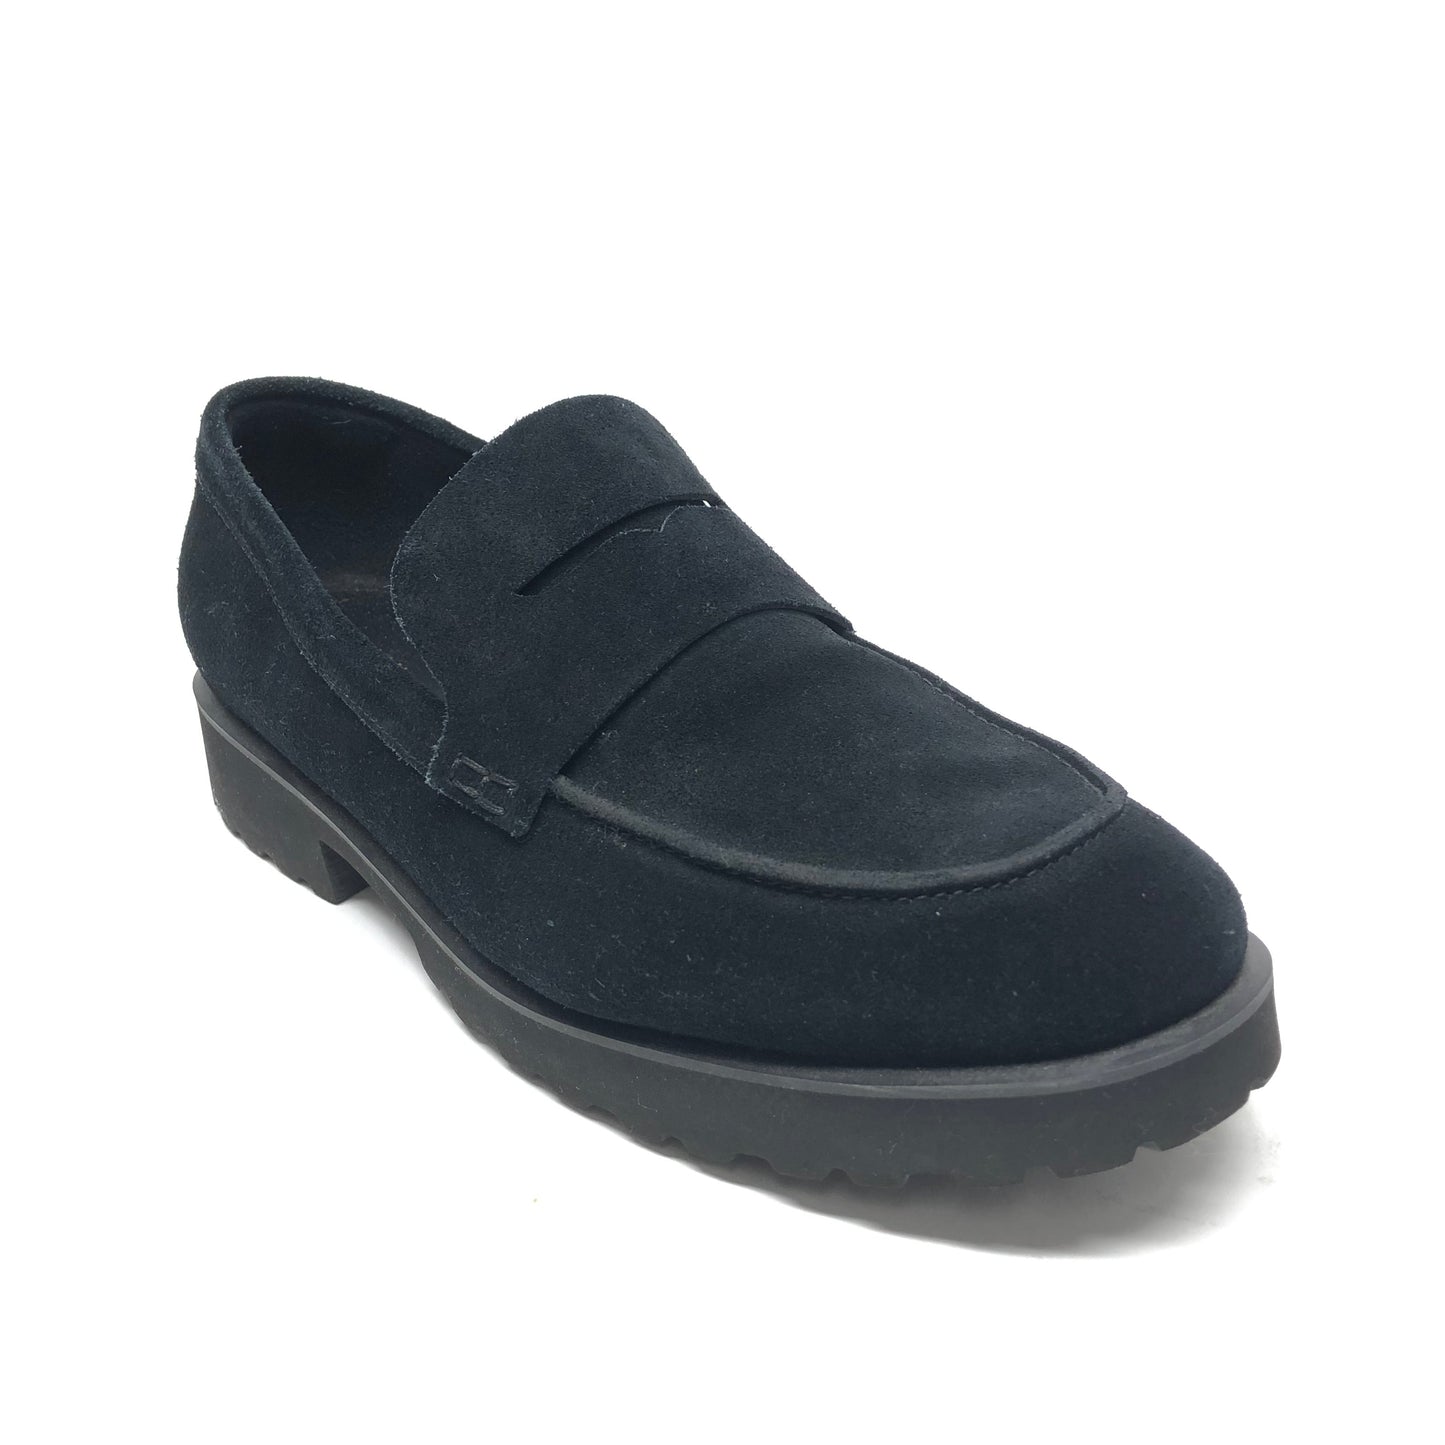 Shoes Flats Loafer Oxford By Cole-haan  Size: 10